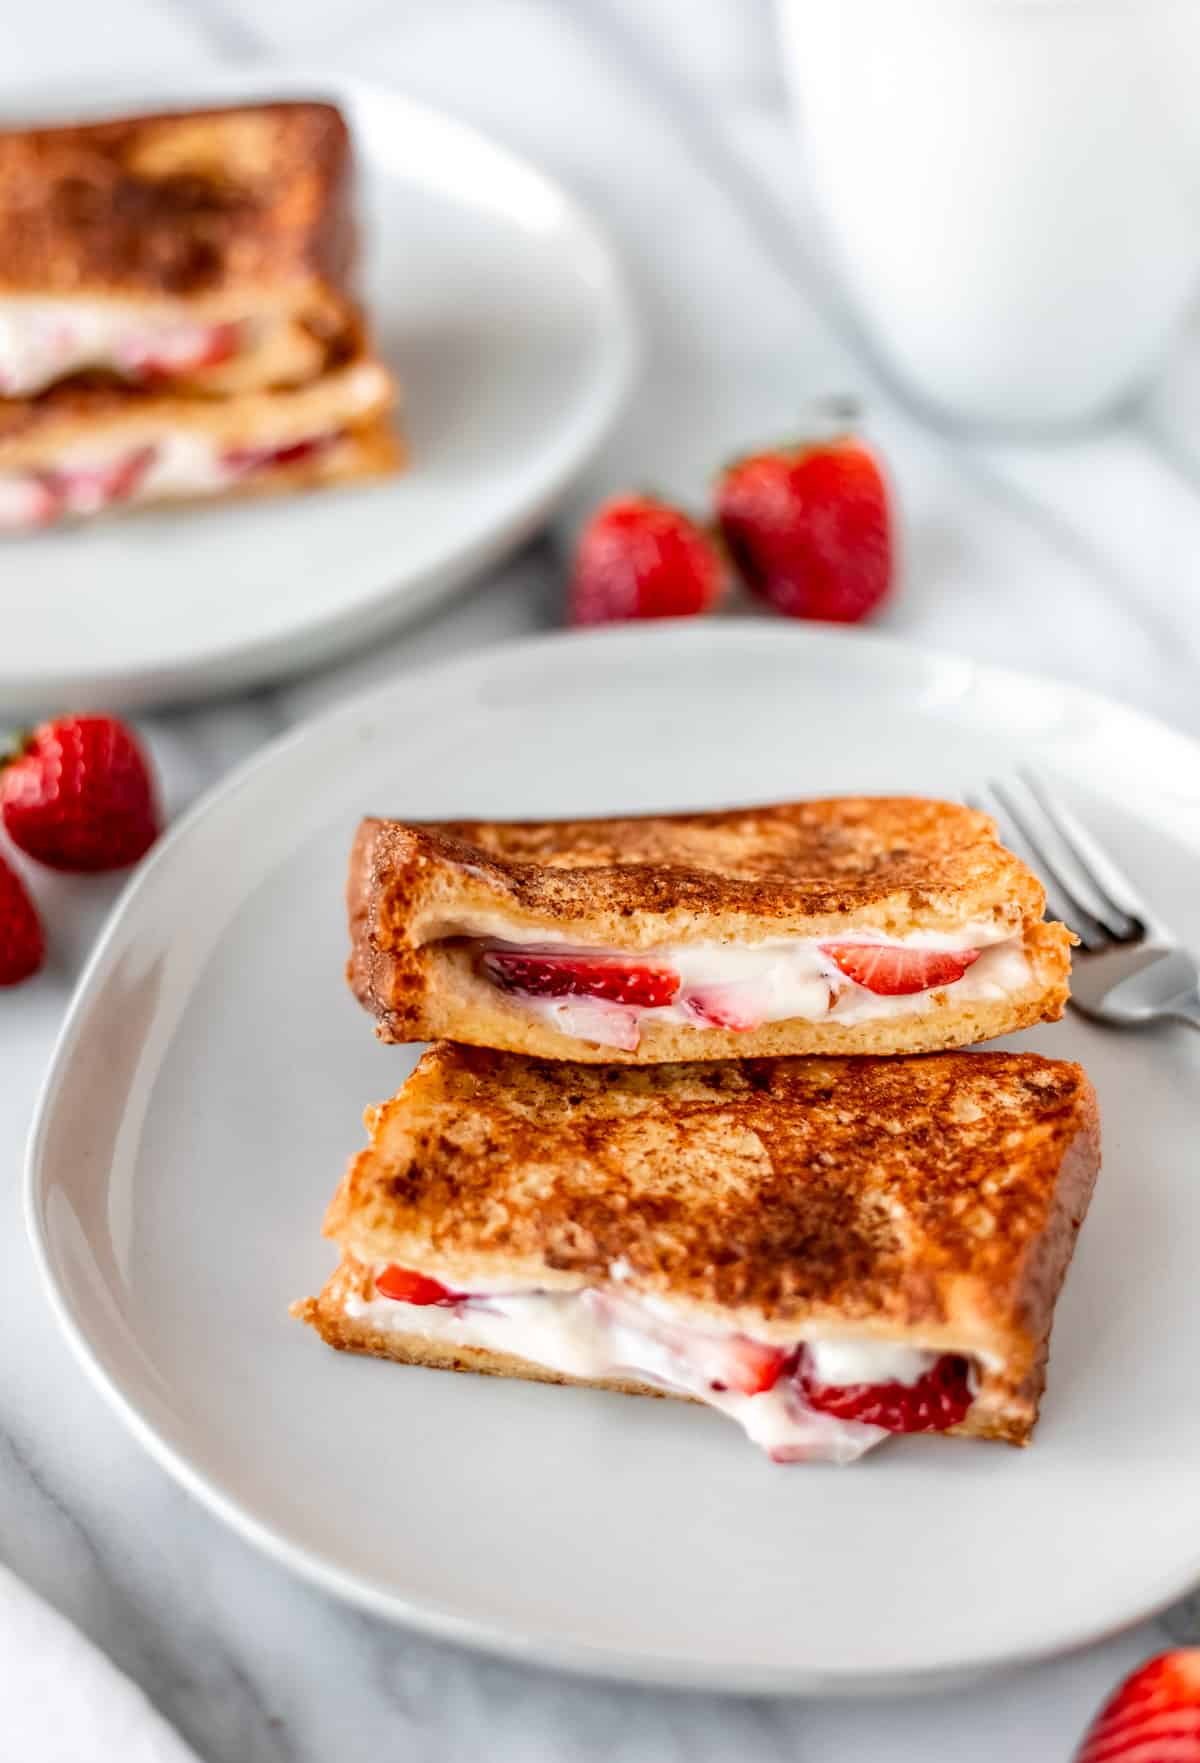 Two halves of strawberry french toast layered over one another on a white plate with a mug, strawberries and a second plate of french toast in the background.